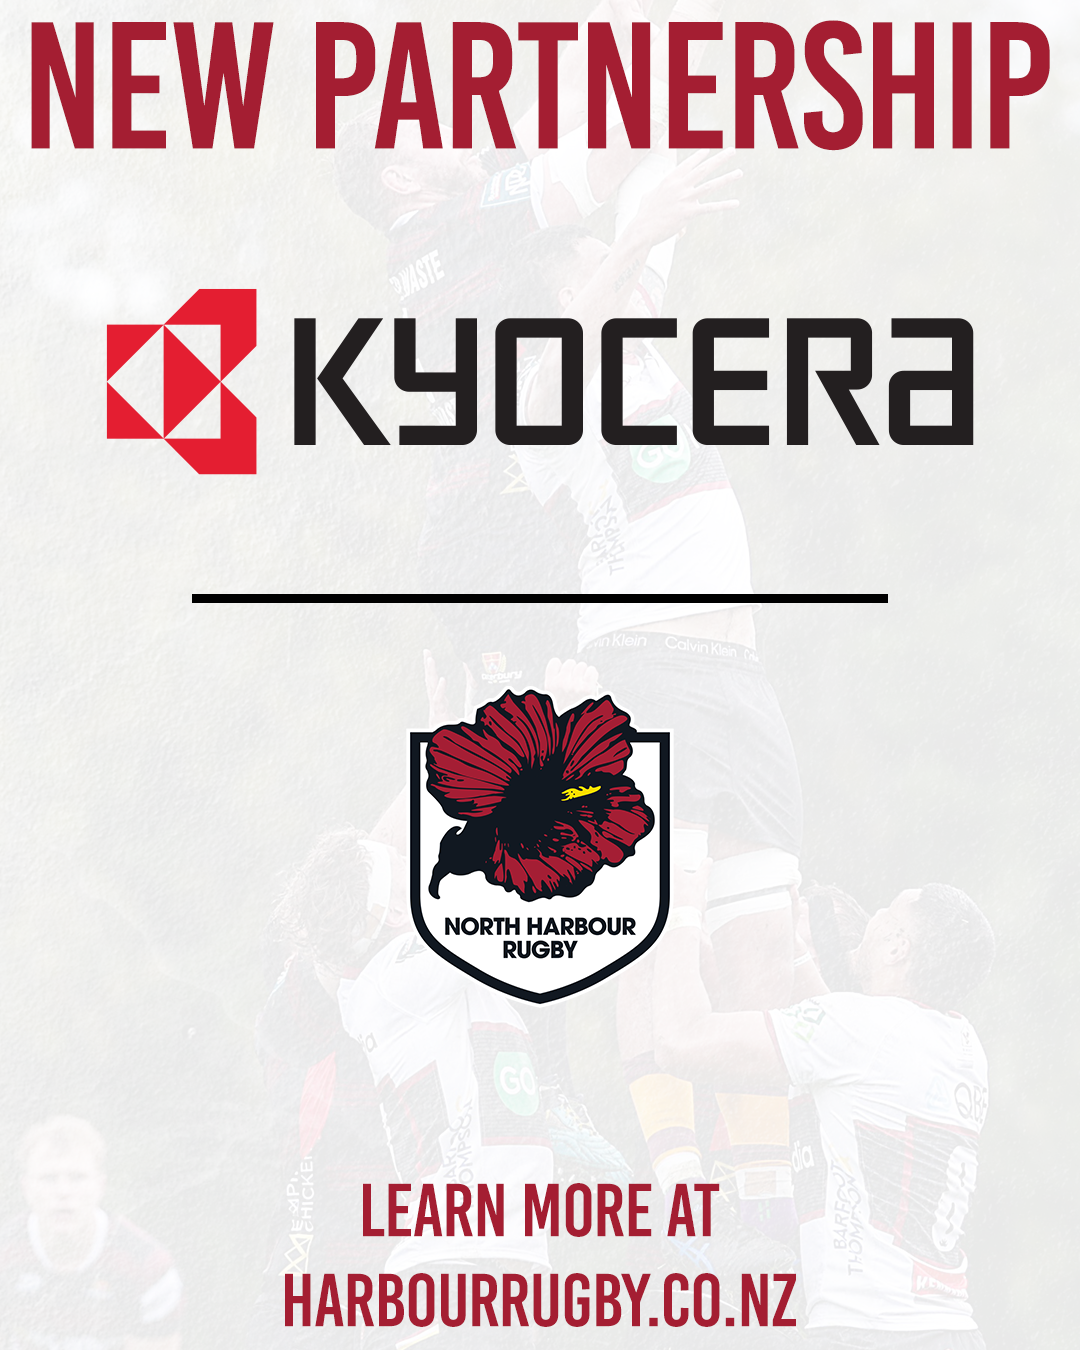 North Harbour Rugby Announces Partnership with Kyocera